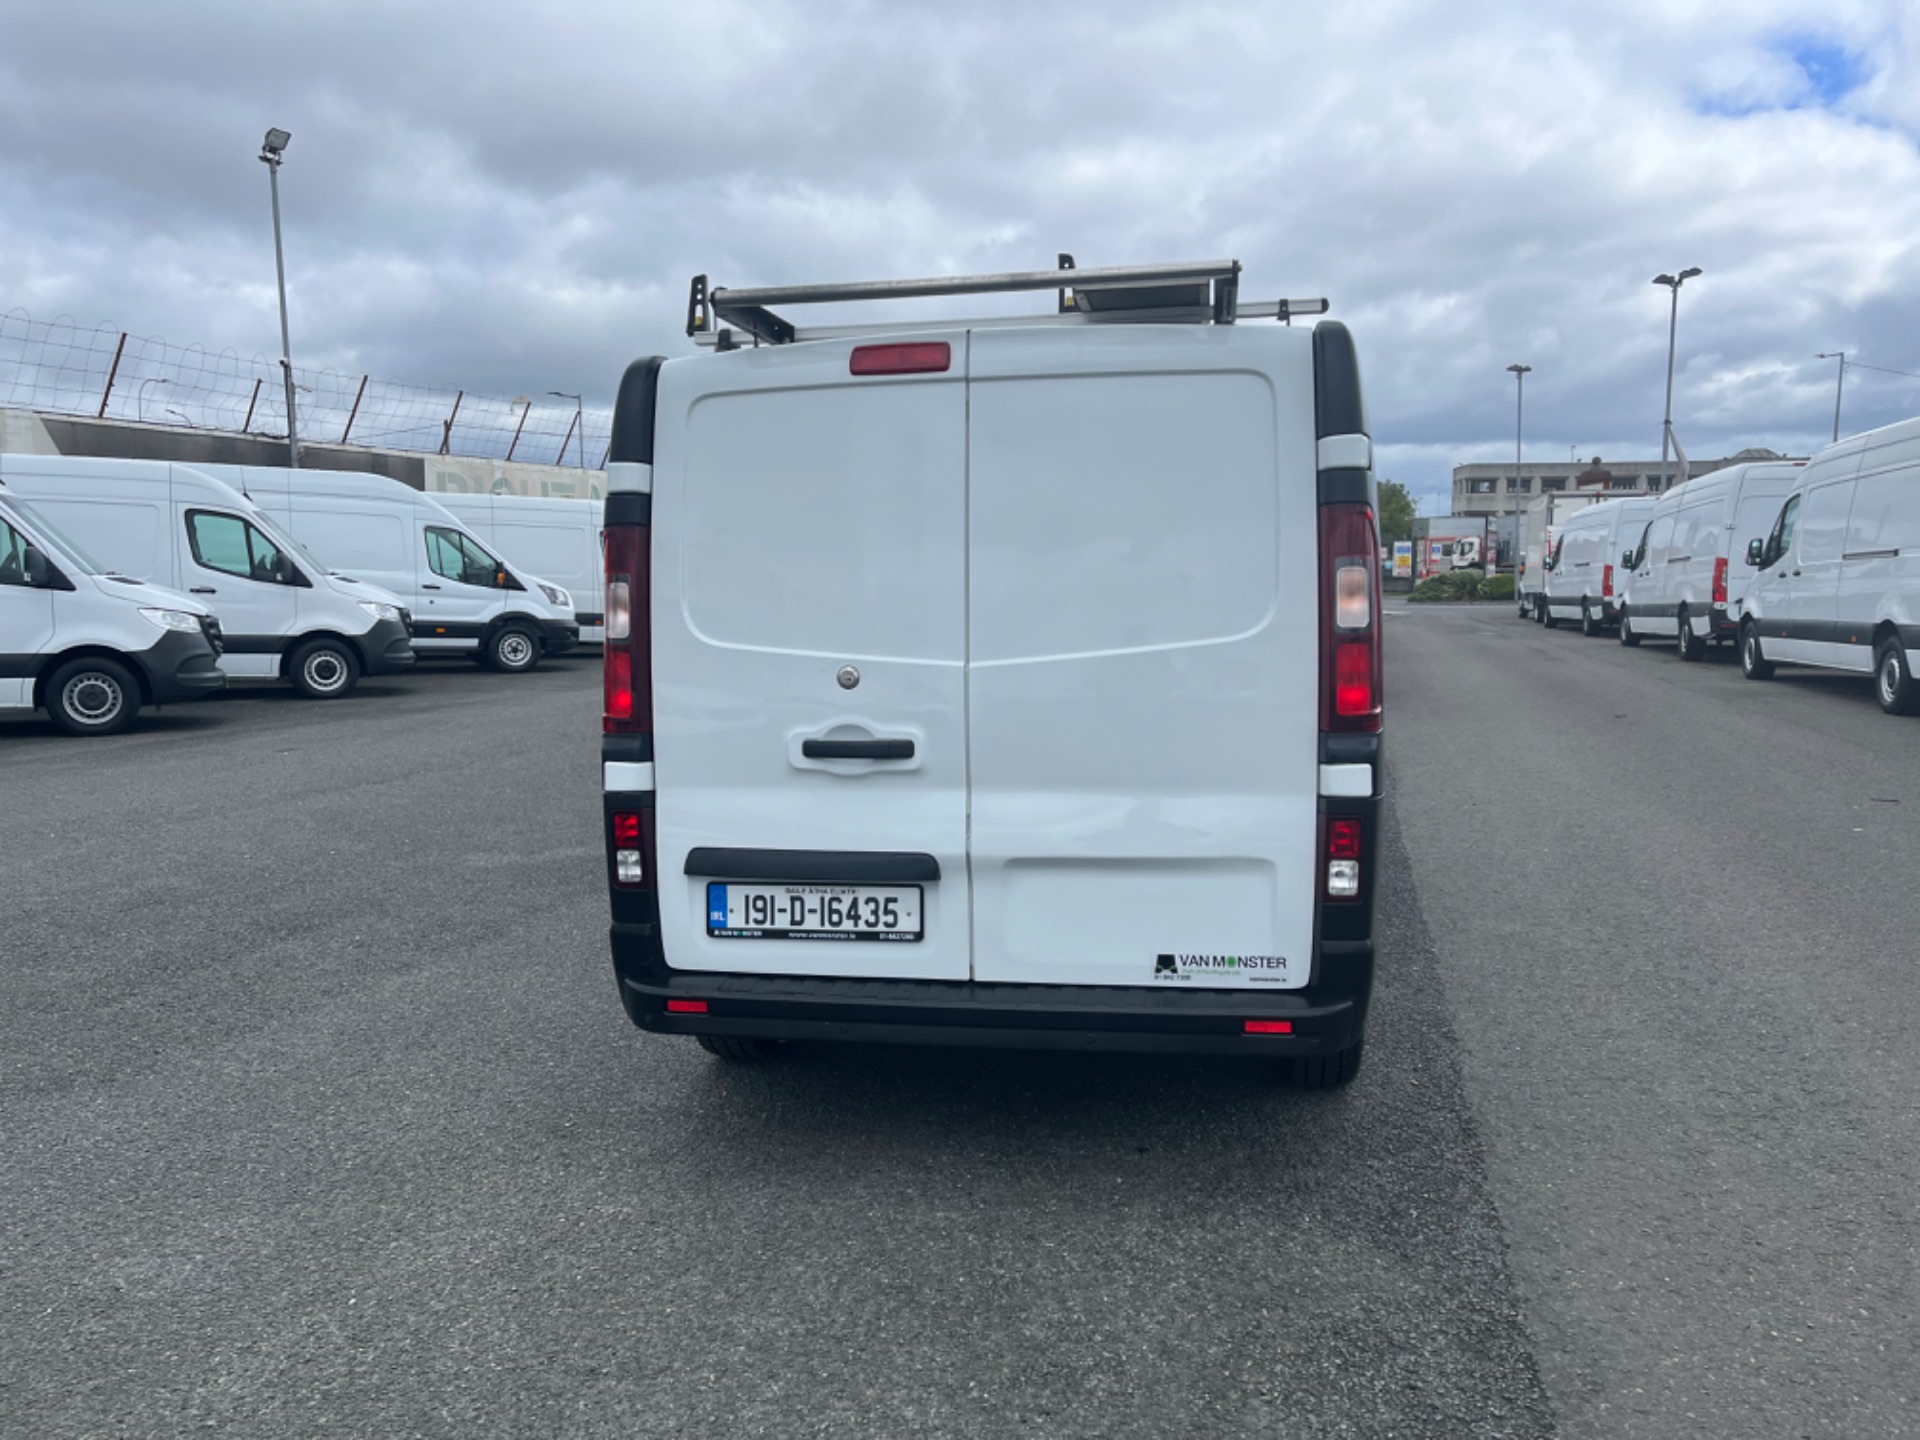 2019 Renault Trafic LL29 DCI 120 Business (191D16435) Image 10